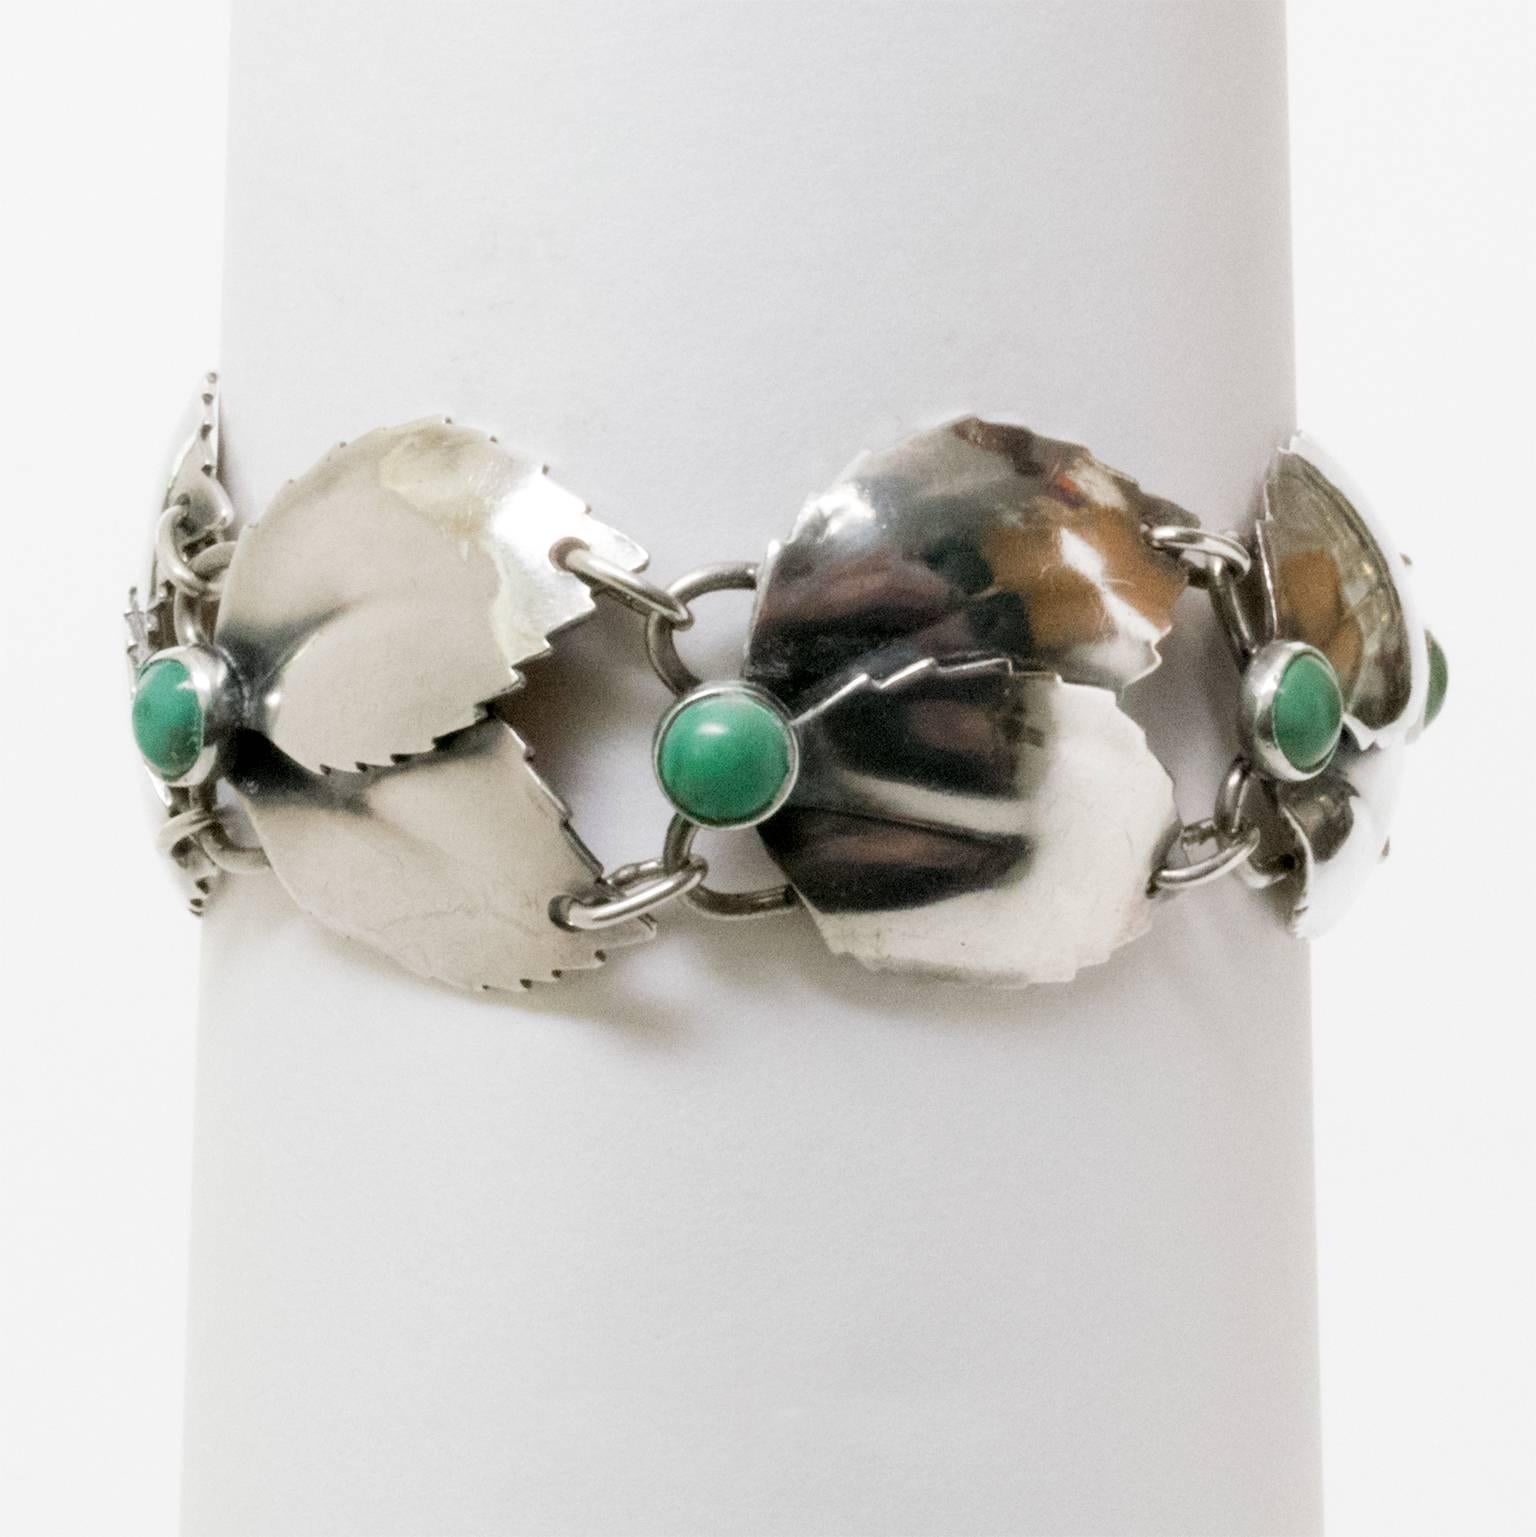 A silver bracelet with linked overlapping leaves detailed with malachite cabochons. Designed by Gertrud Engel for A. Michelsen, 1950's, Stockholm Sweden.
Diameter: 2.5